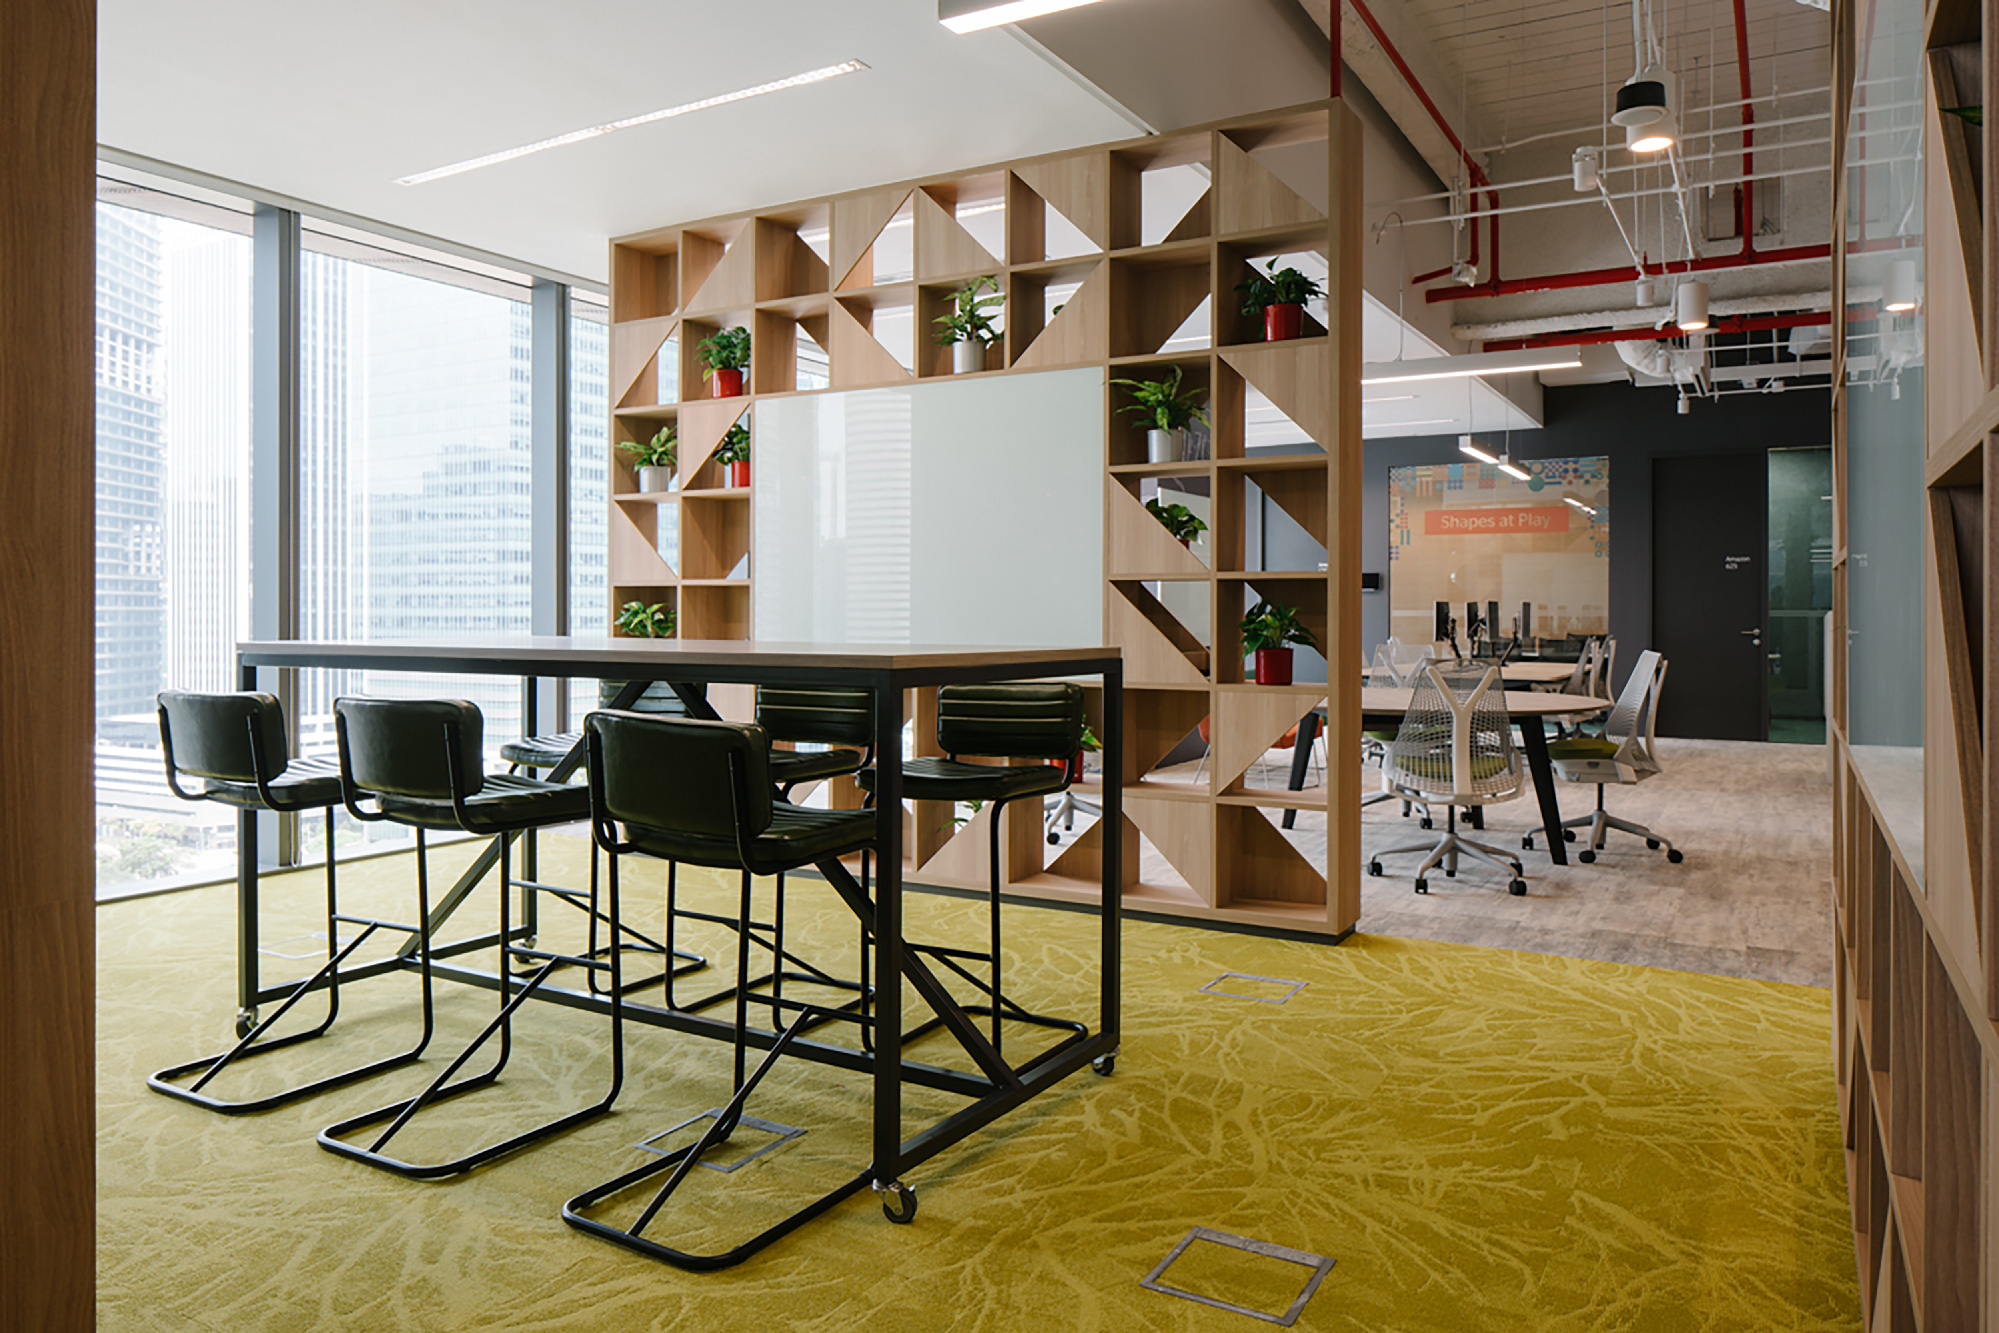 Prudential Singapore office, a symbol of cultural transformation with the Embracing Change design concept.<br />
